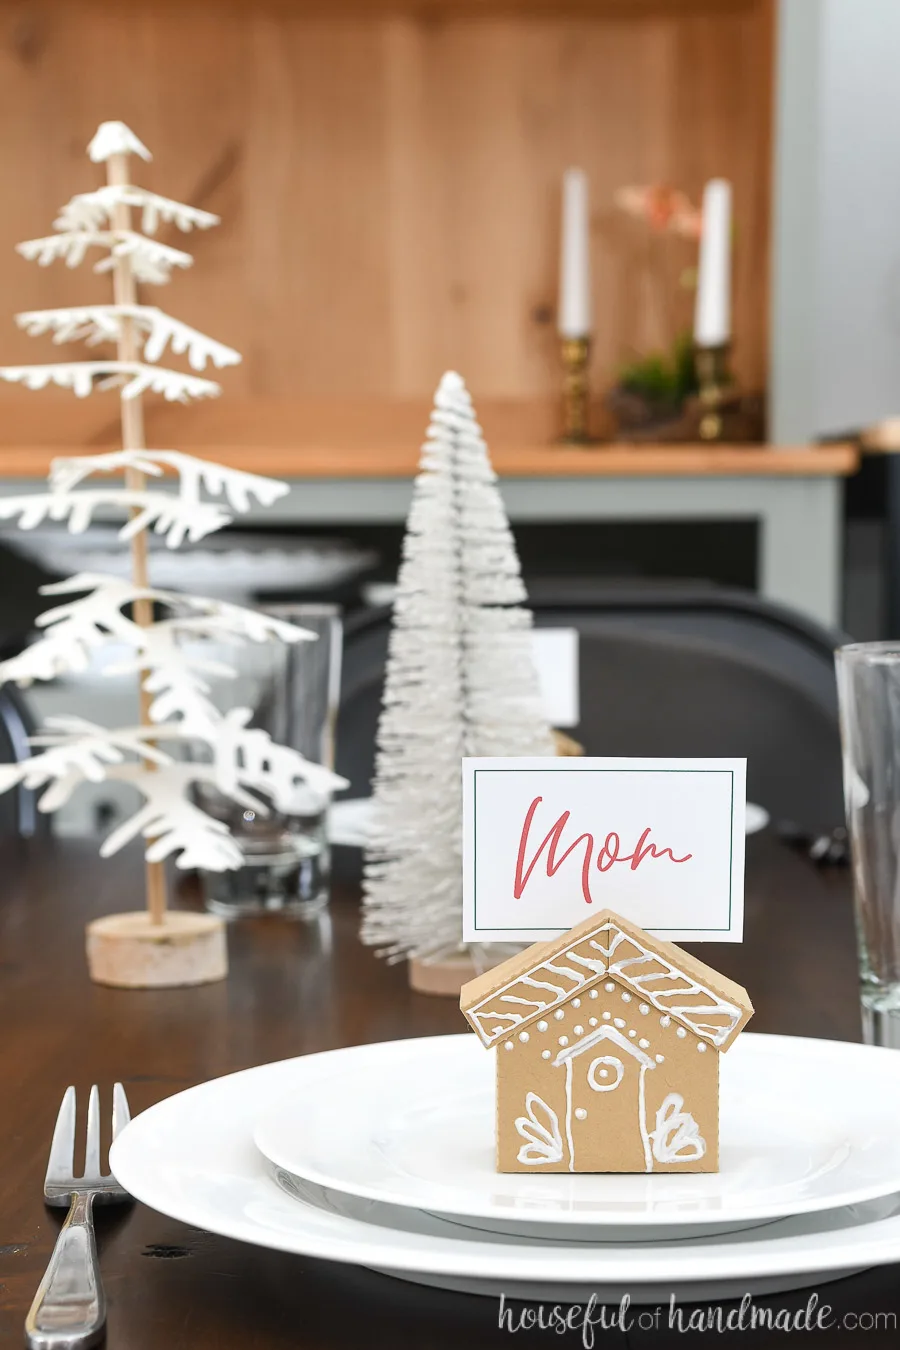 Christmas table set with Christmas trees as the centerpiece, white plates, with a brown paper gingerbread house place card holder sitting on them.